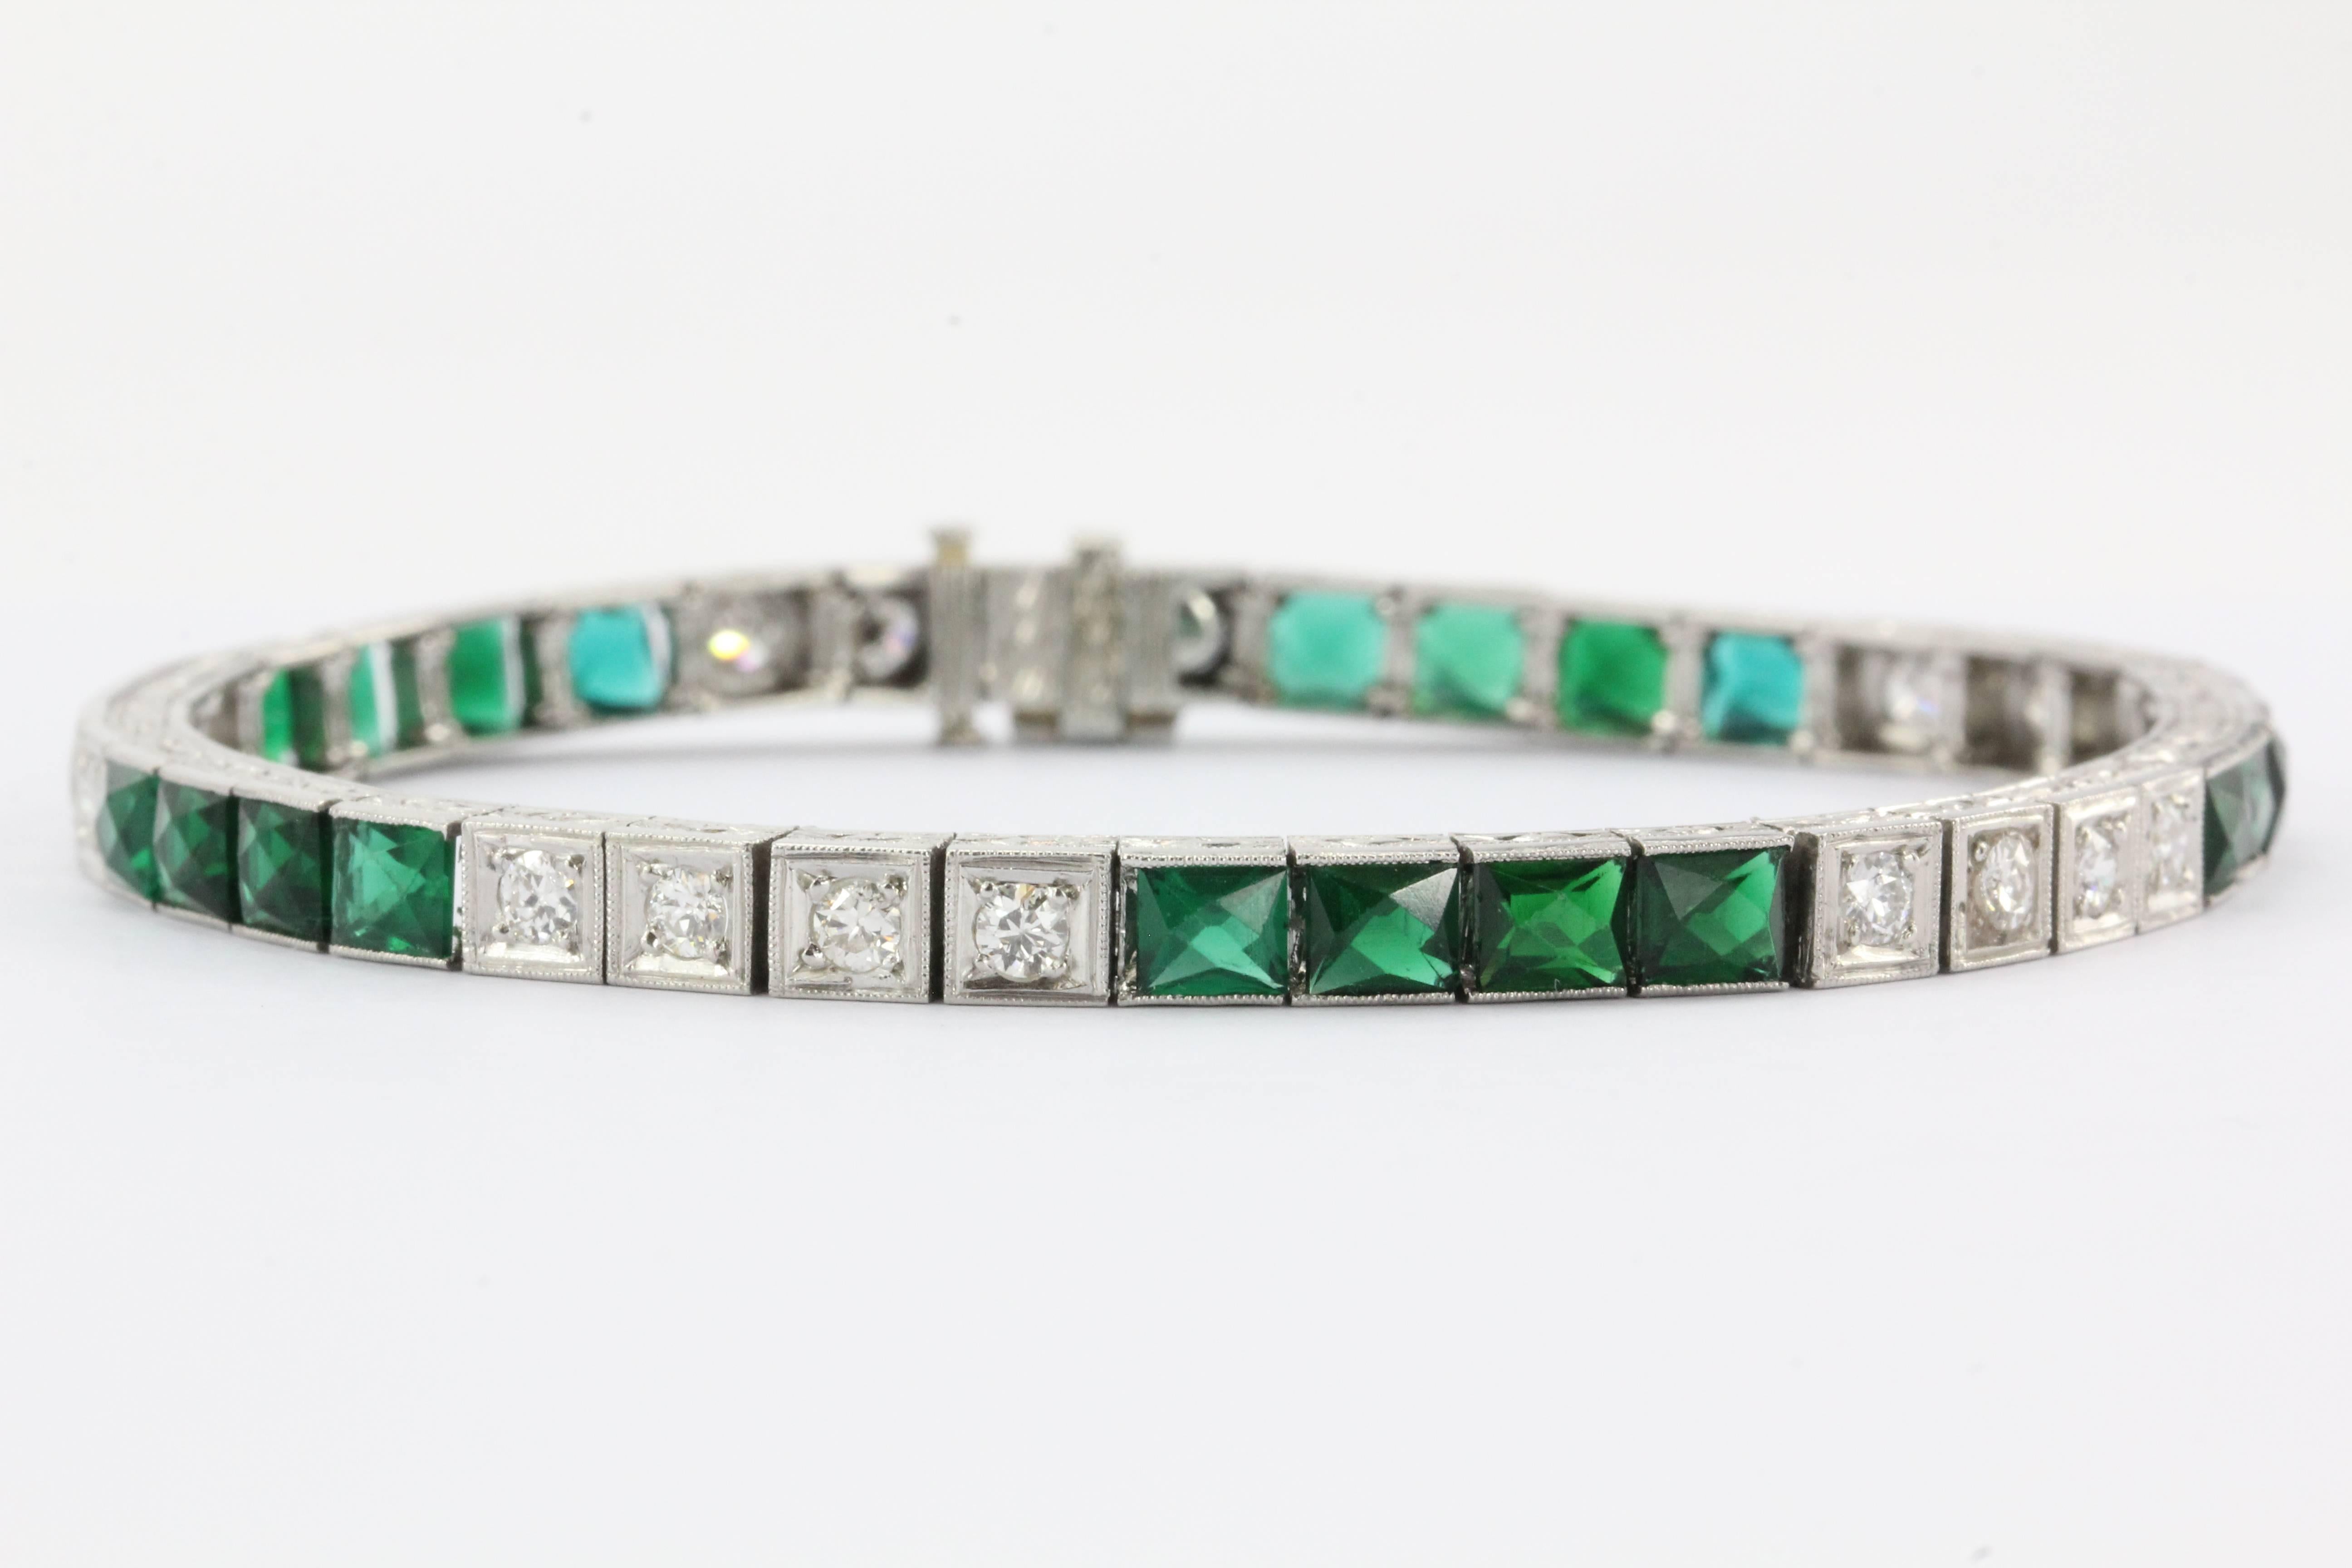 Vintage Art Deco Platinum French Cut Emerald & Diamond Tennis Bracelet. The bracelet is in excellent estate condition and ready to wear. It is set with 20 french cut emeralds that come to approximately 6 carats and 20 diamonds that add an additional